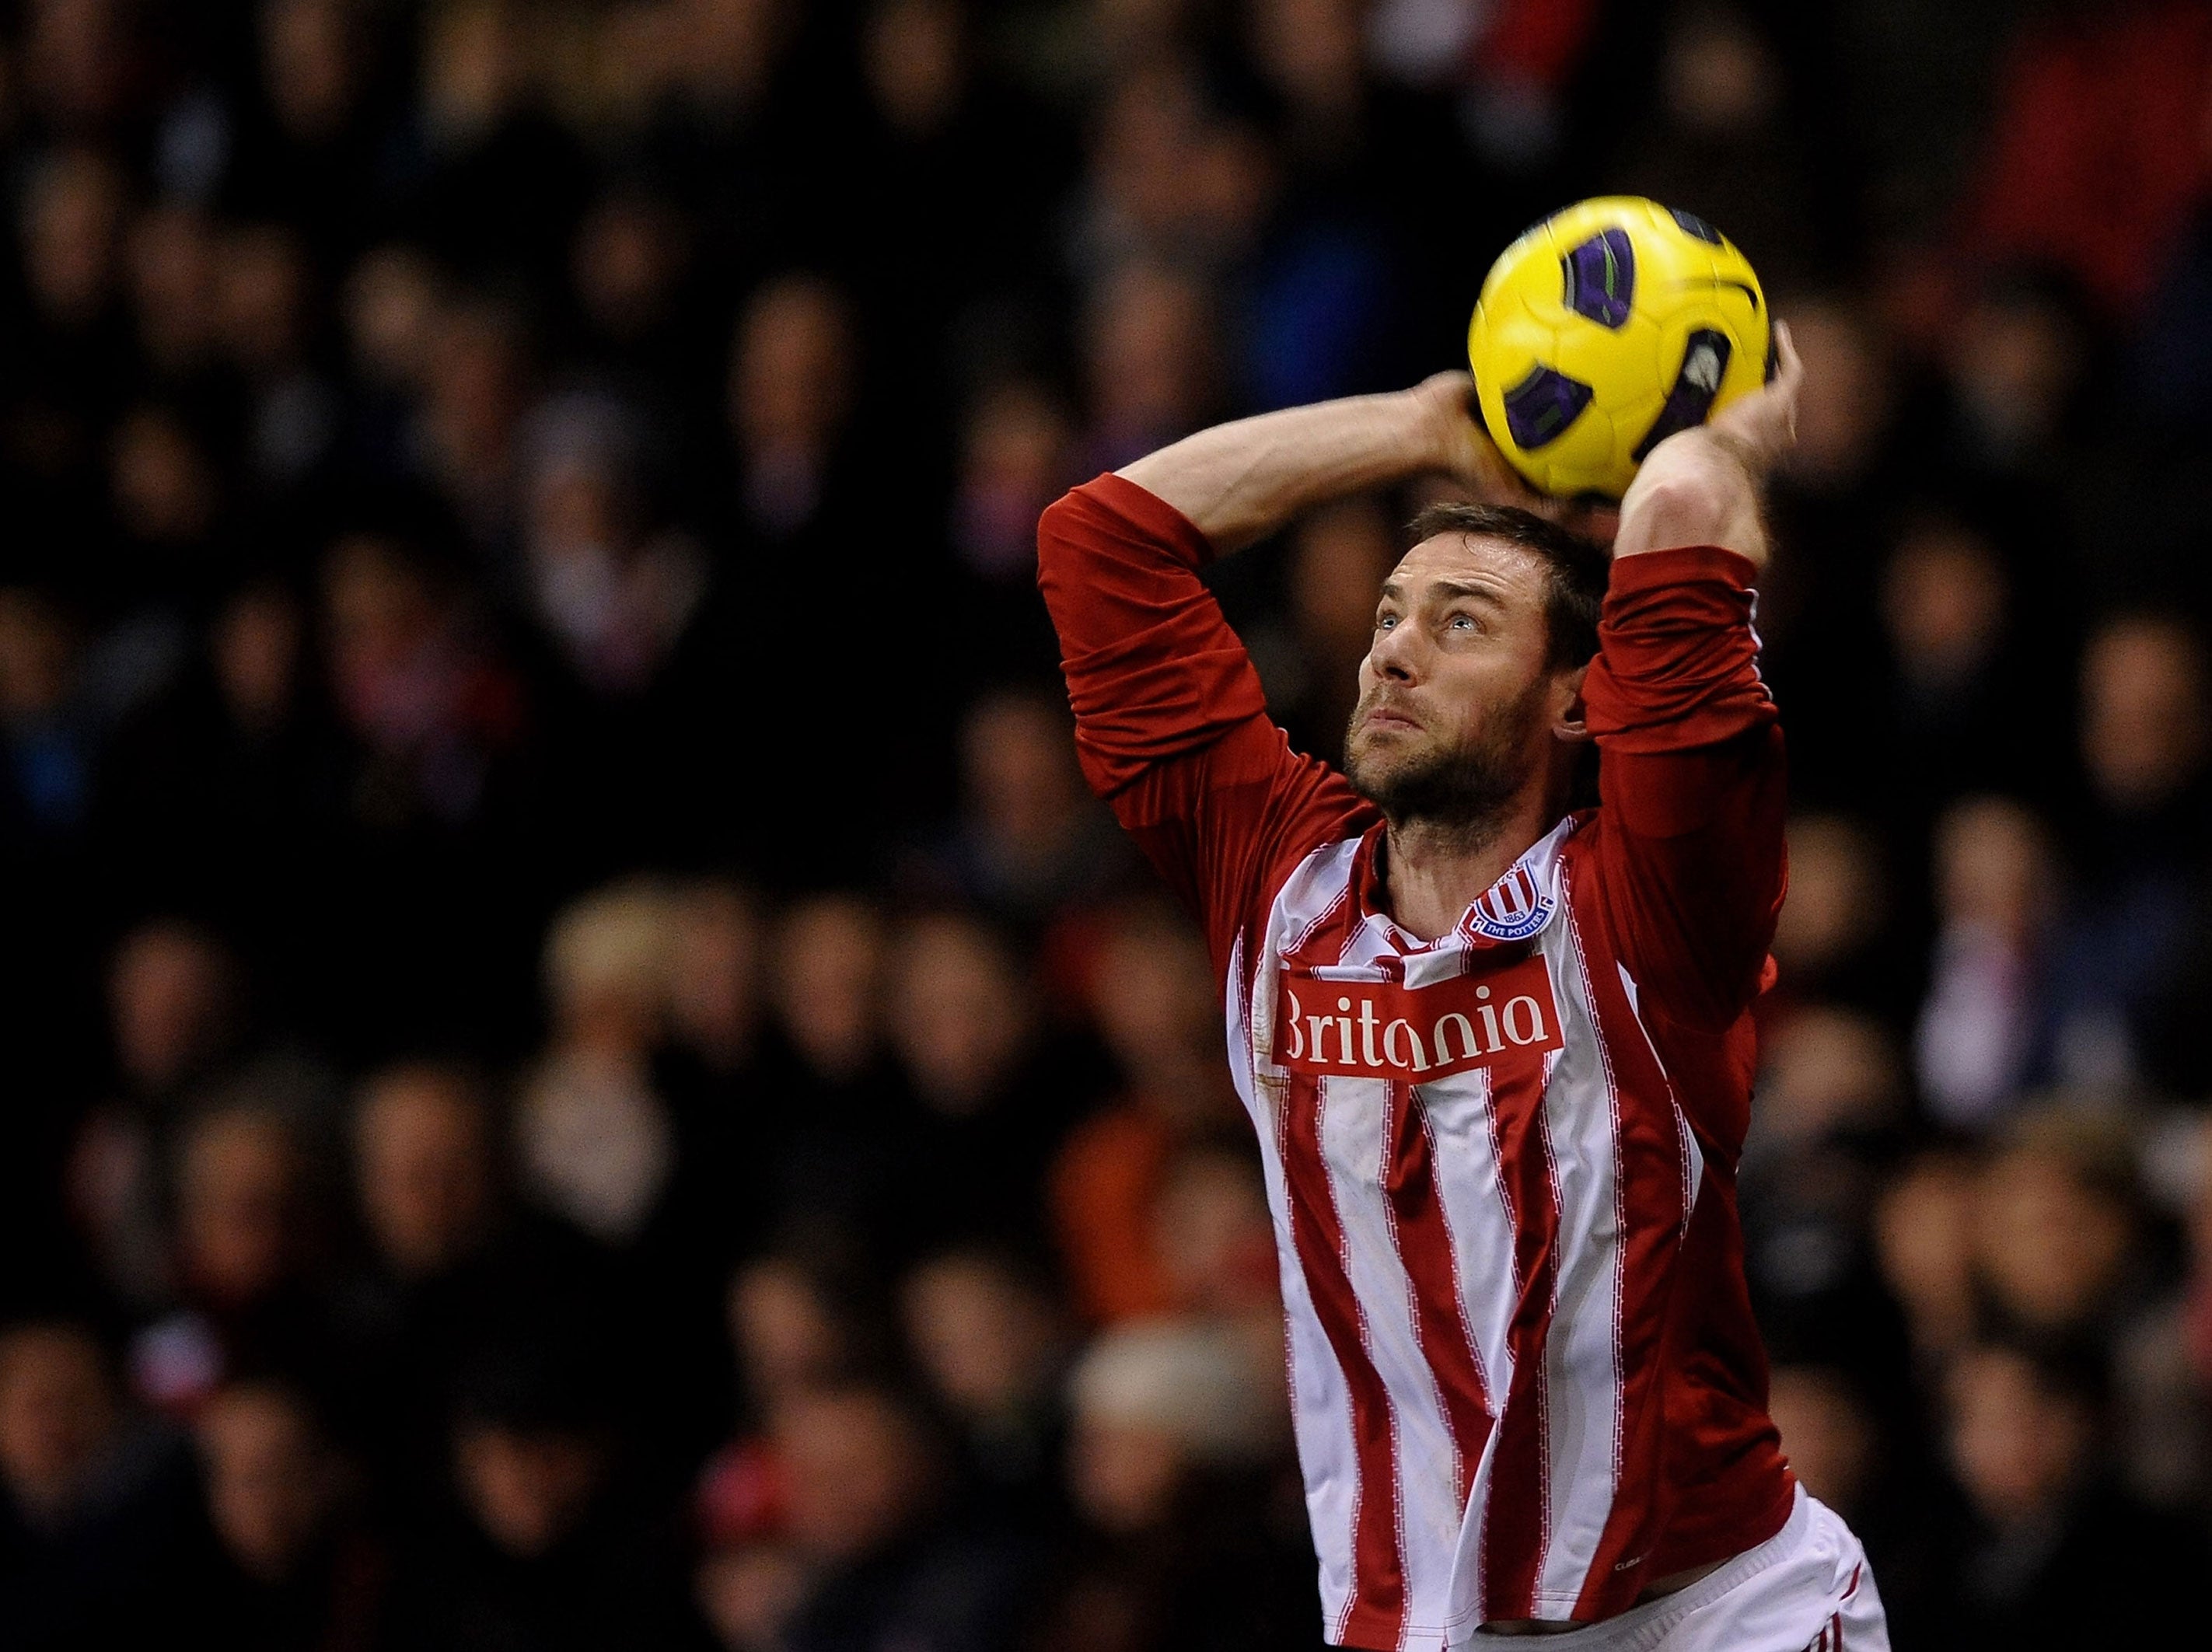 Rory Delap of Stoke City takes a throw in during the Barclays Premier League match between Stoke City and West Bromwich Albion at The Britannia Stadium on February 28, 2011 in Stoke on Trent, England.